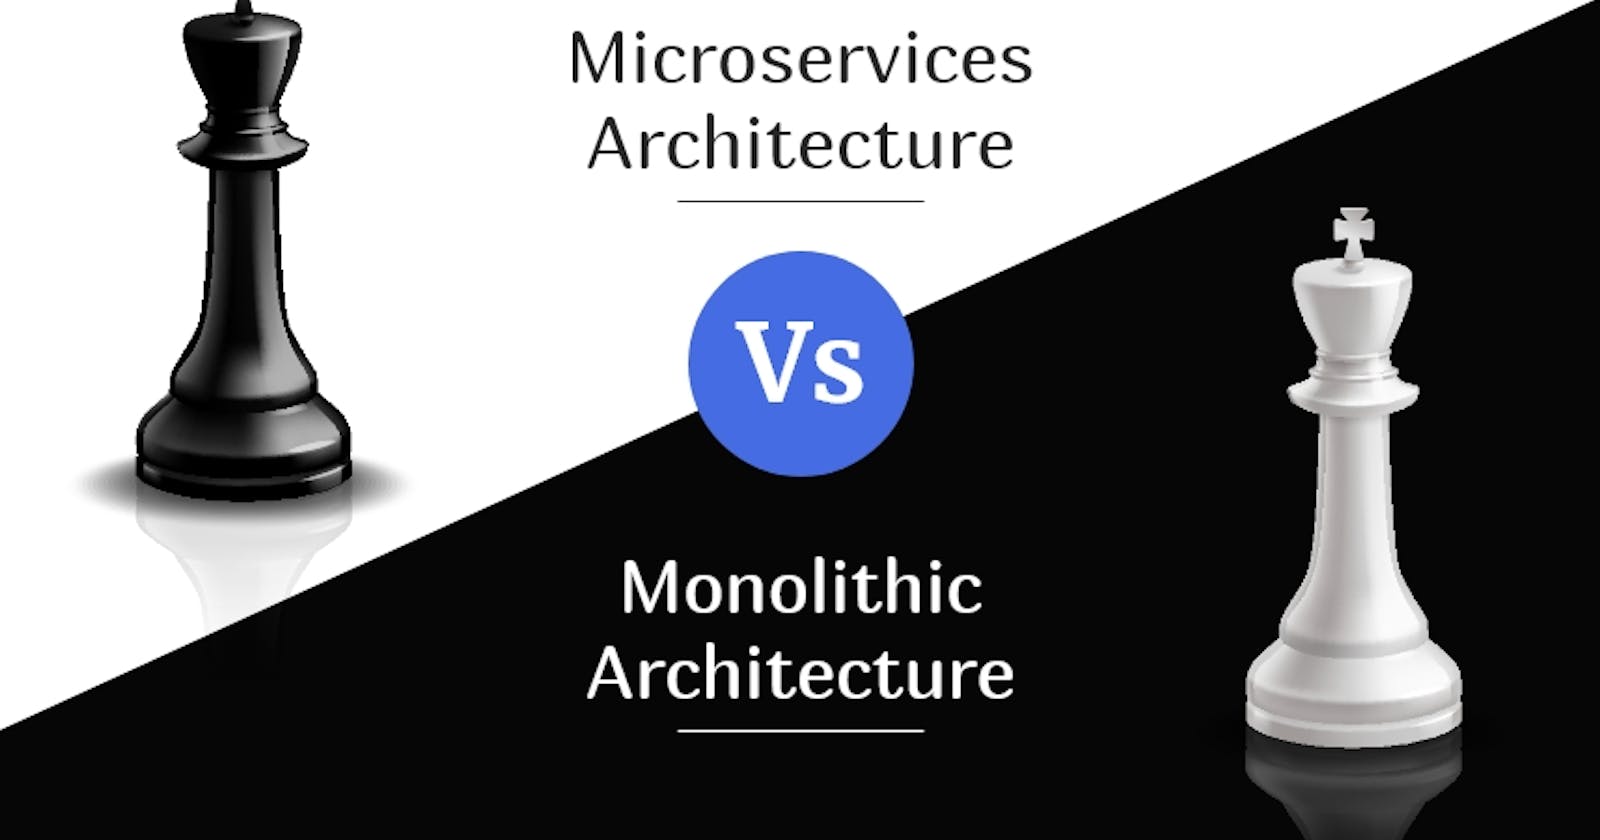 Monolithic Architecture and Microservices Architecture